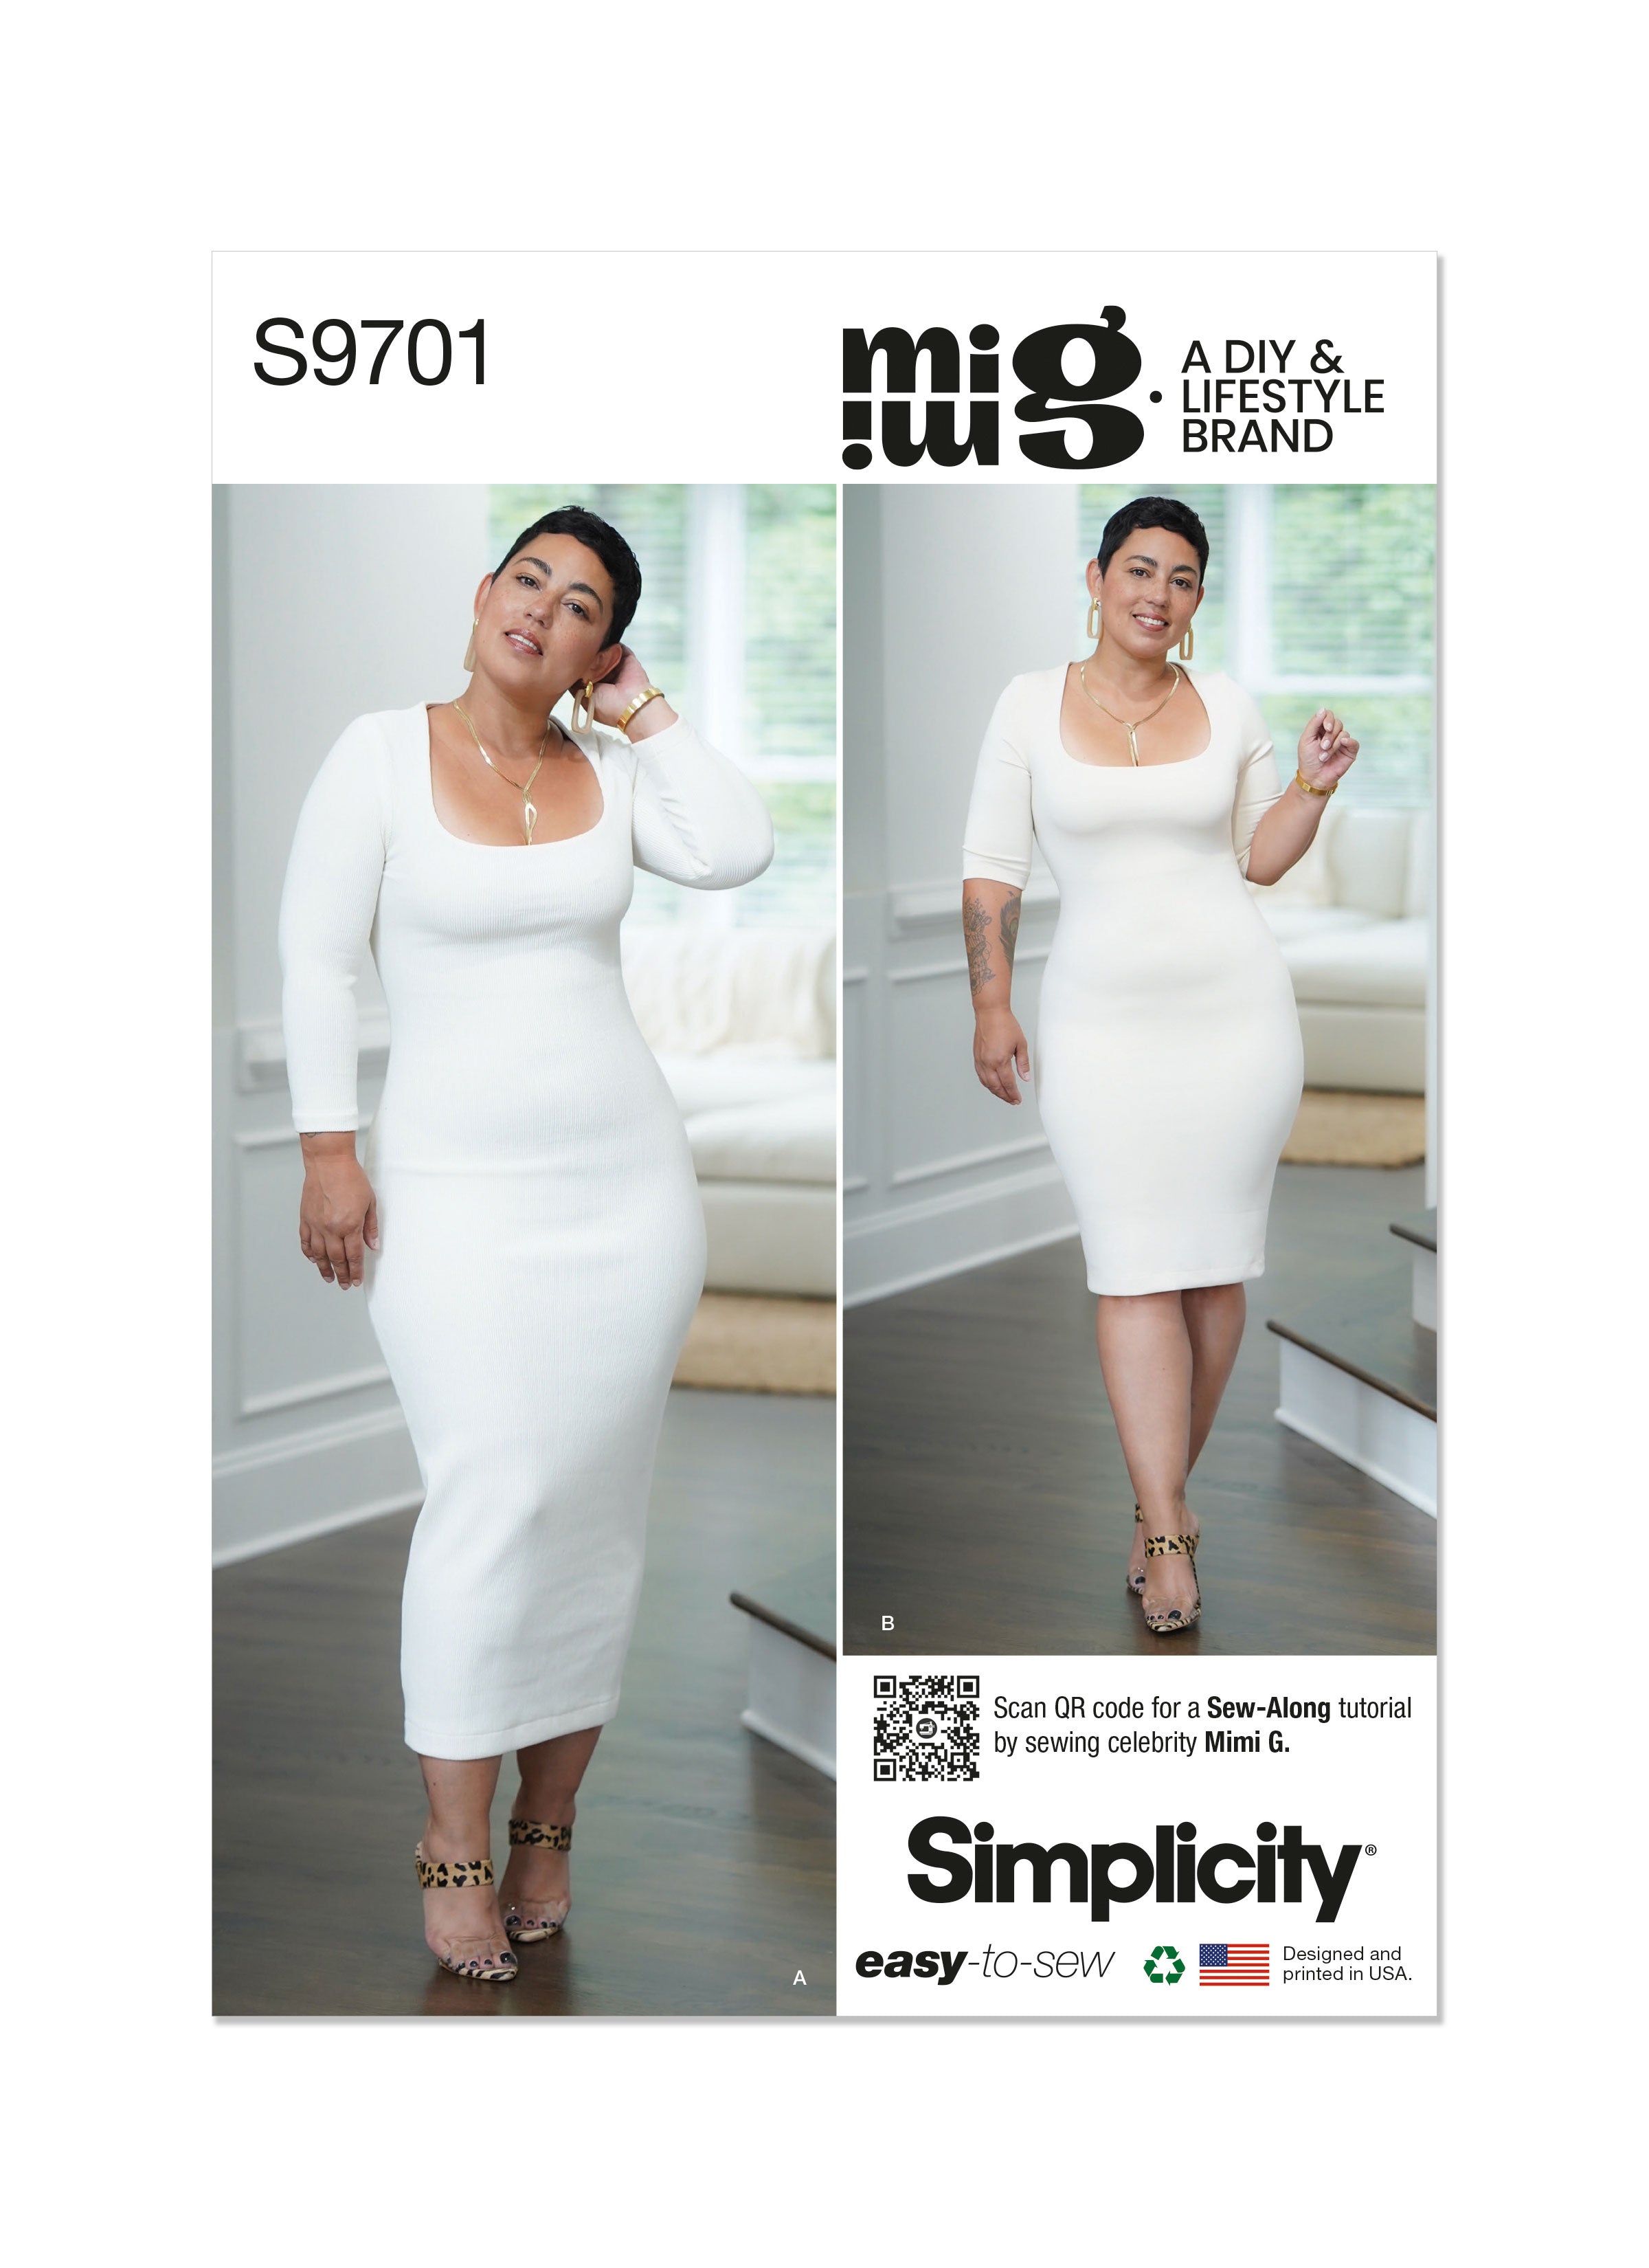 Simplicity 9701 Knit Dress pattern by Mimi G Style from Jaycotts Sewing Supplies